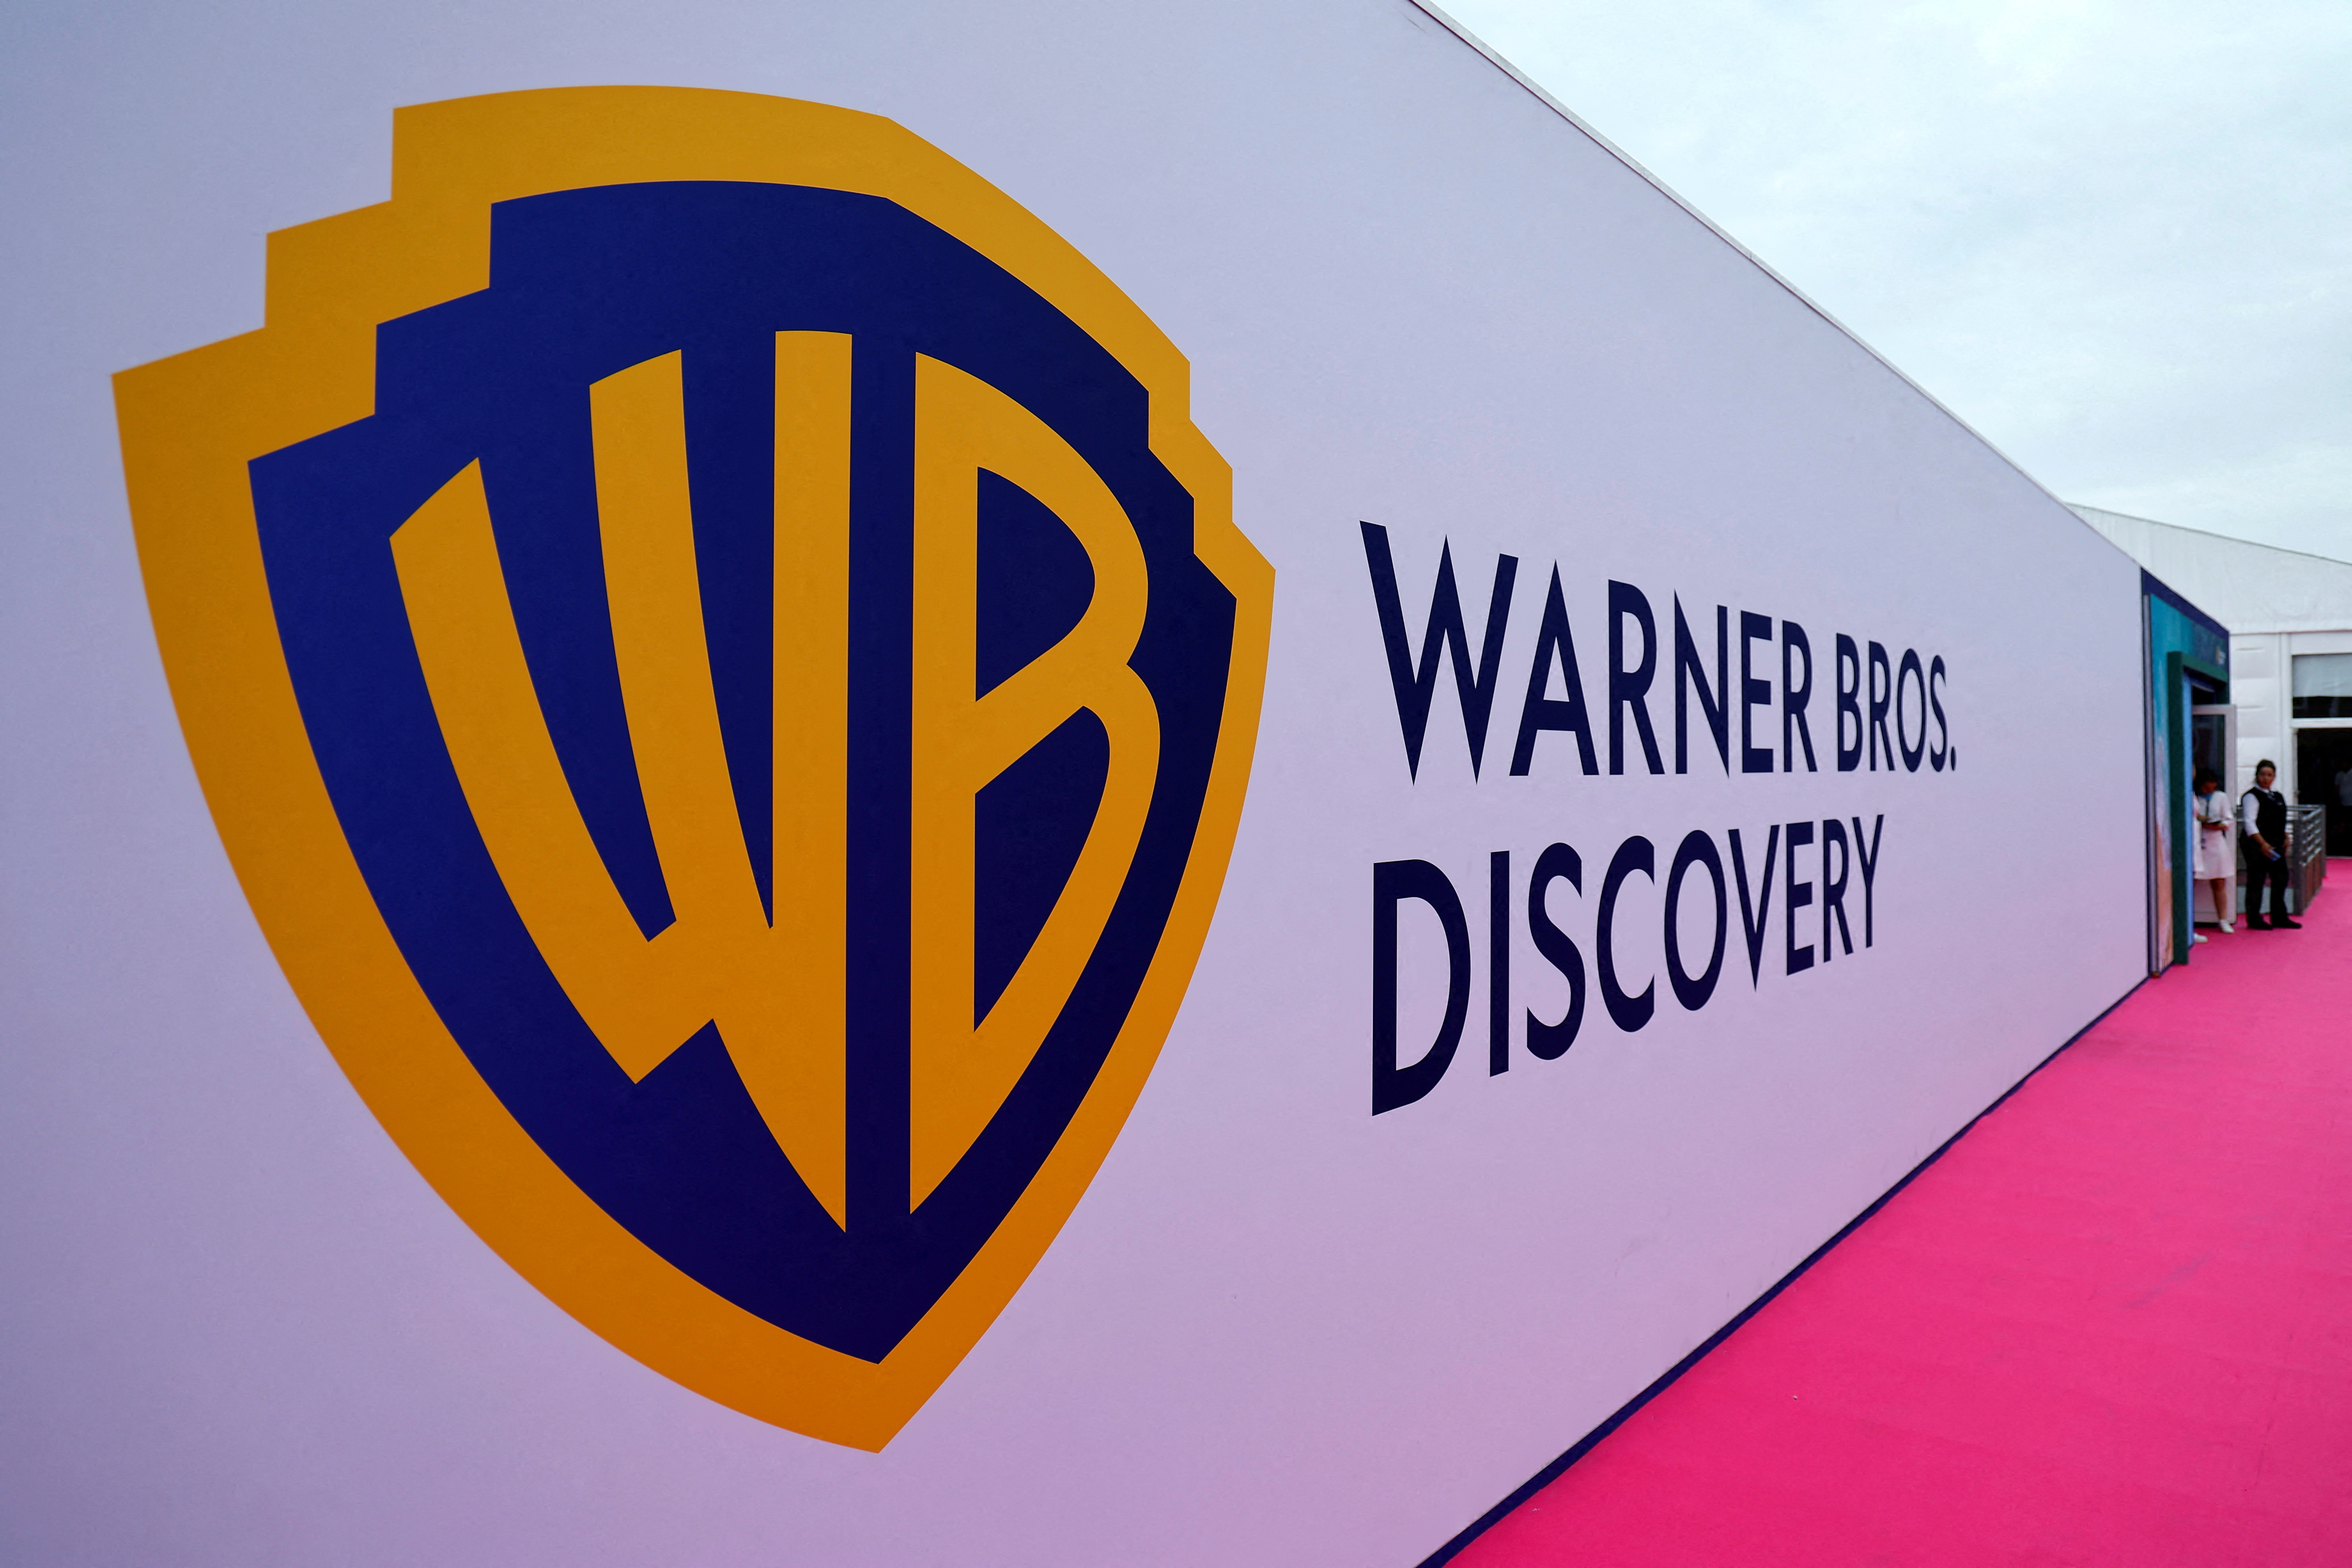 Warner Bros Discovery to tap popular movie franchises, posts loss | Reuters